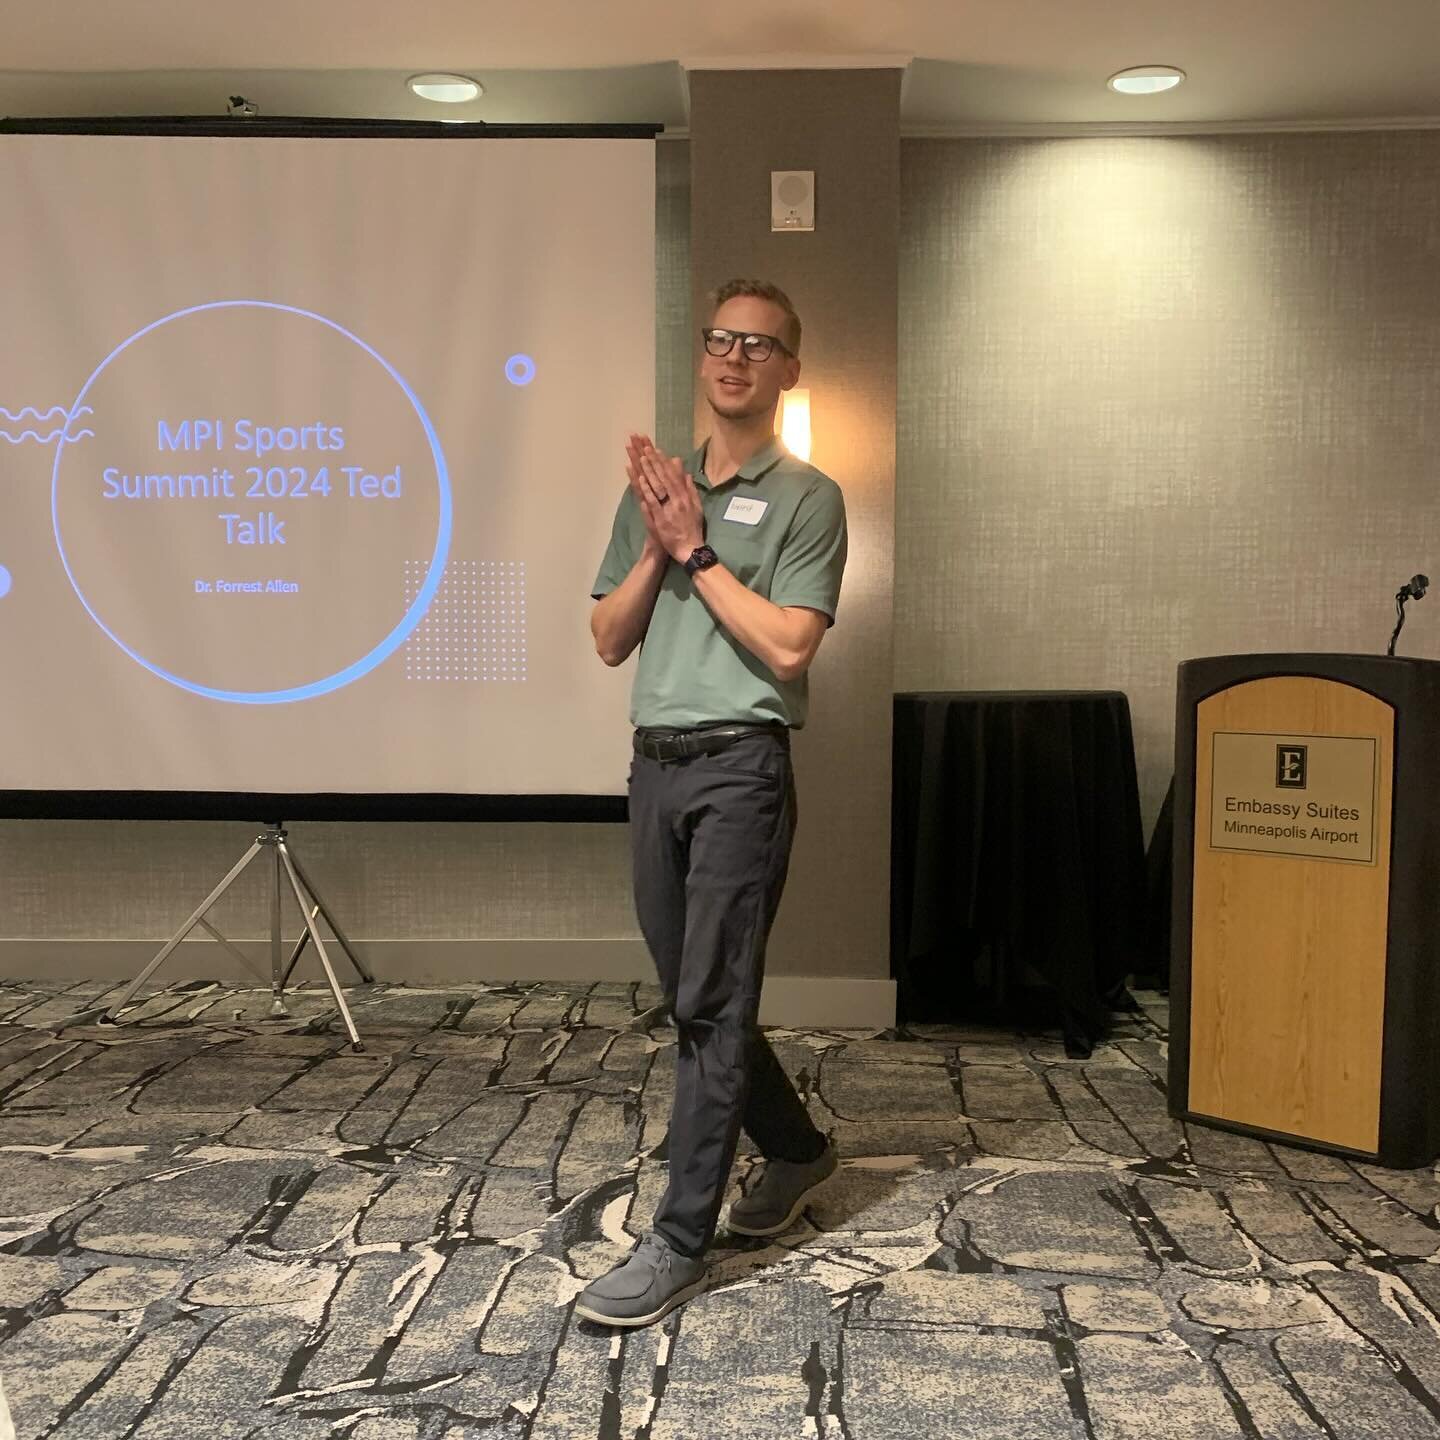 Dr. Forrest had the opportunity to speak for MPI TedTalk this past weekend in Minneapolis 🙌🏻⁣⁣
⁣⁣
His Ted Talk was on systematic evaluations and treatments for MSK conditions ‼️⁣⁣
⁣⁣
He then went on to attend the MPI Sports Summit to better serve h